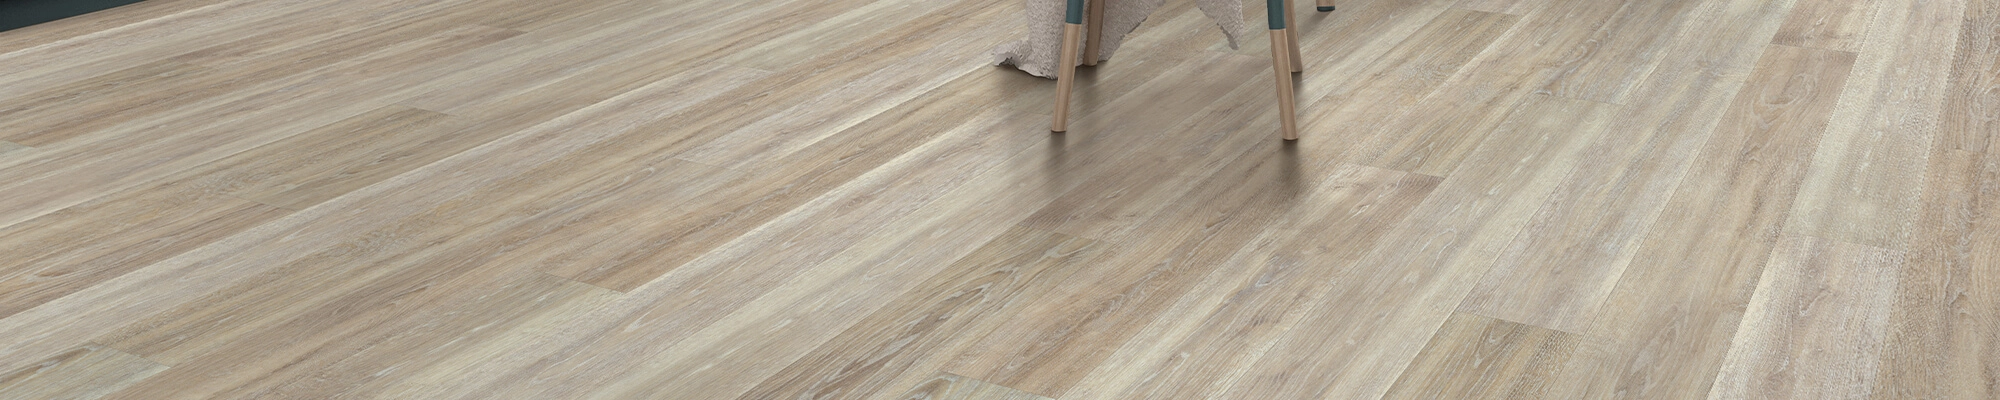 Frequently Asked Questions about Flooring